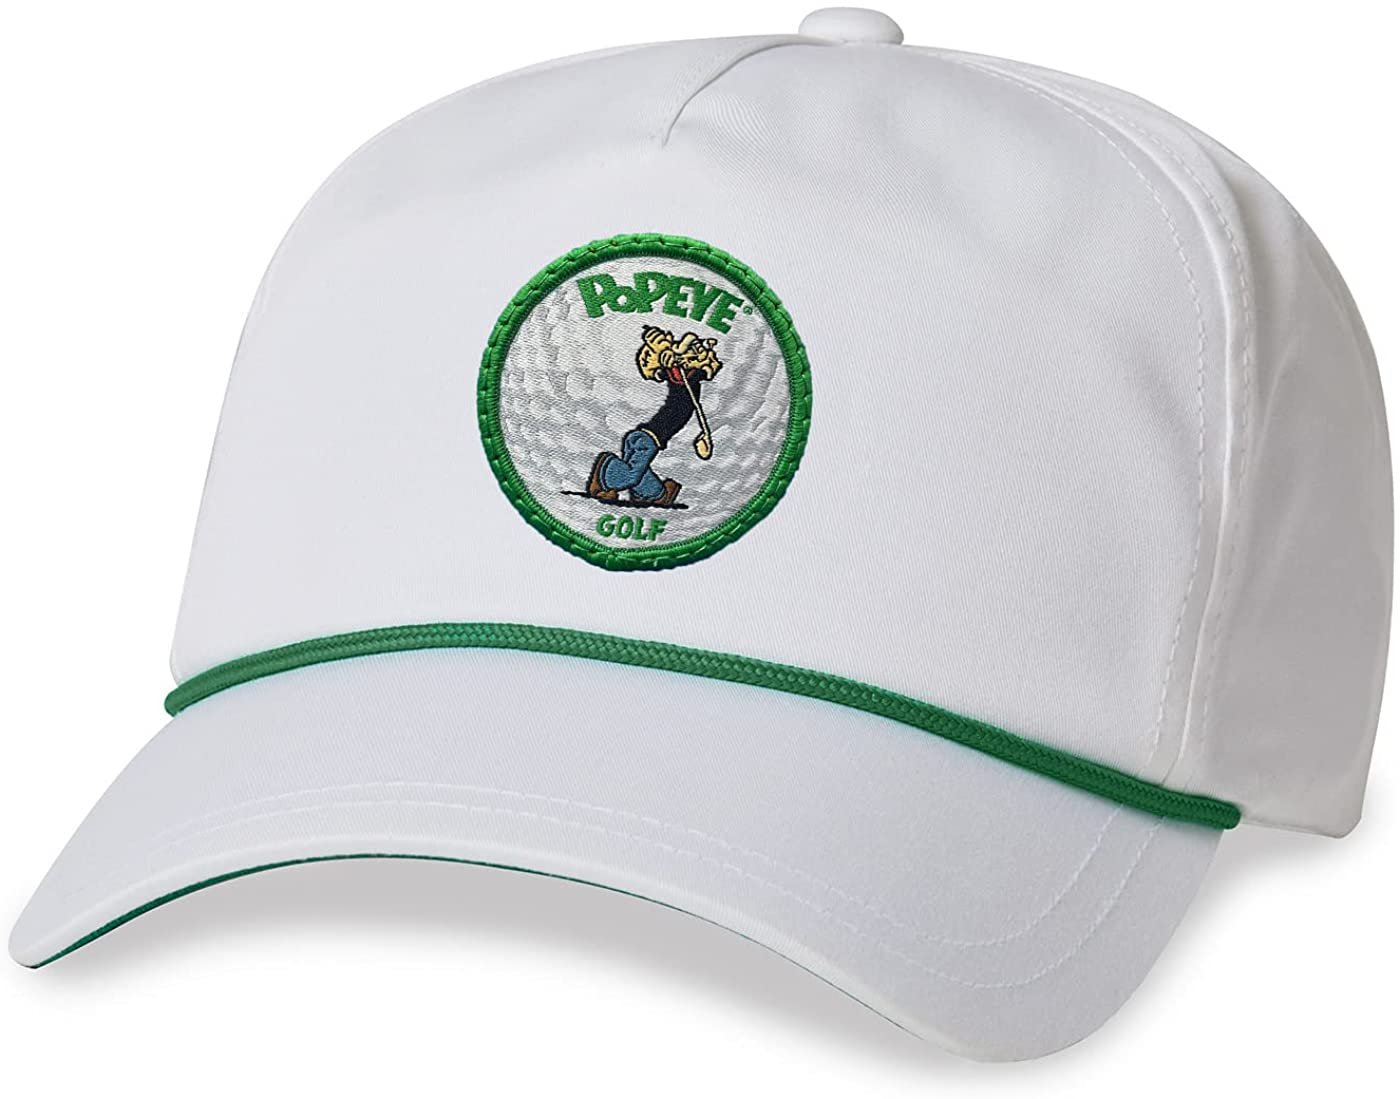 Popeye Golf Lightweight Rope Patch Logo Adjustable Strapback Hat by American Needle